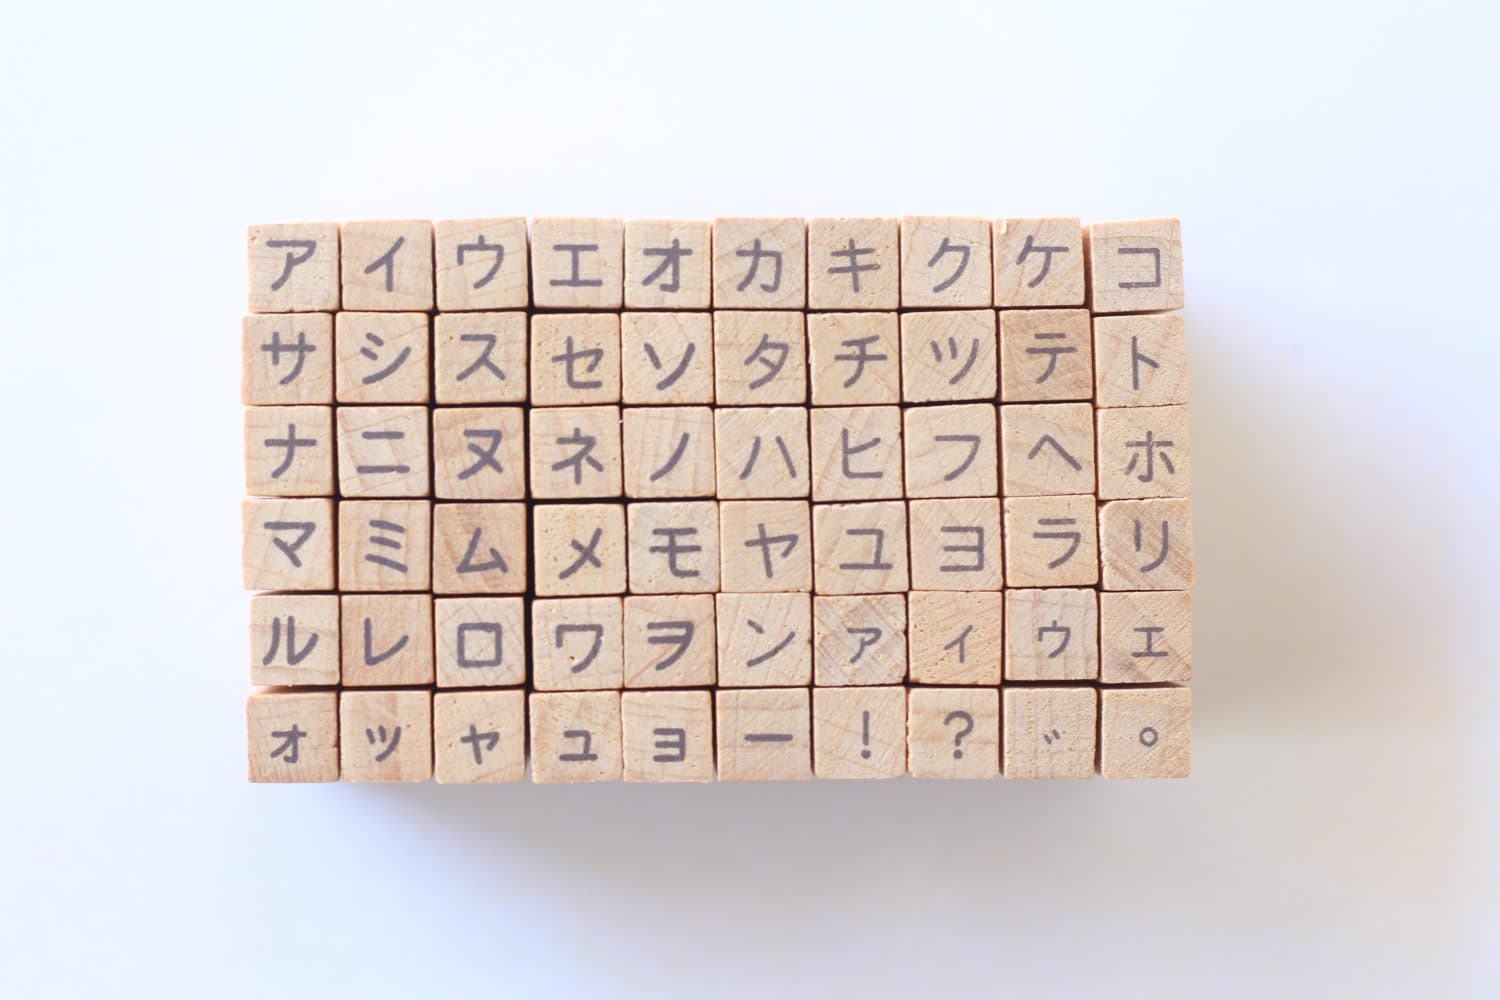 Rubber stamps of Katakana, a type of Japanese alphabets